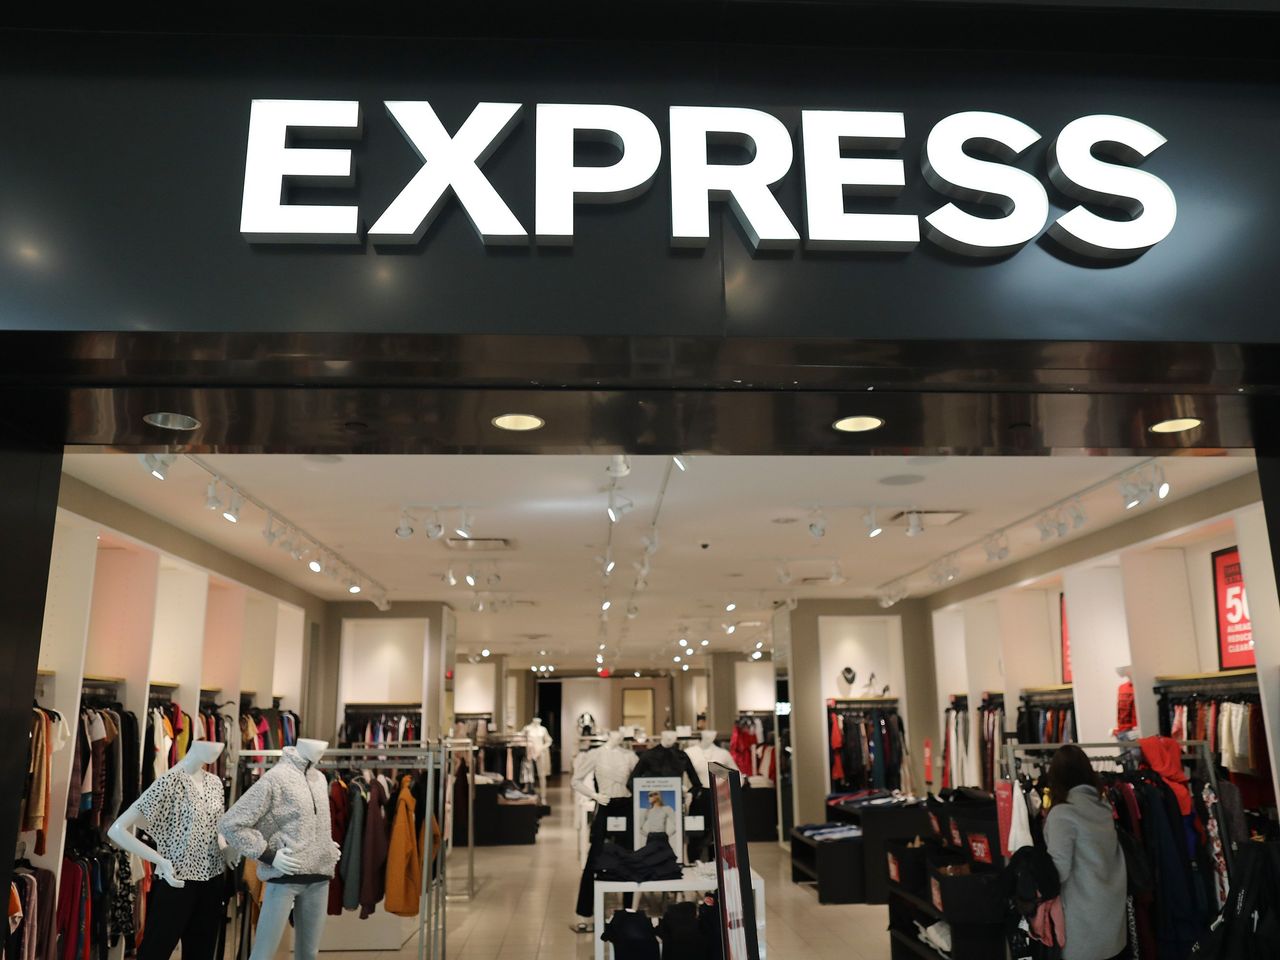 About Express